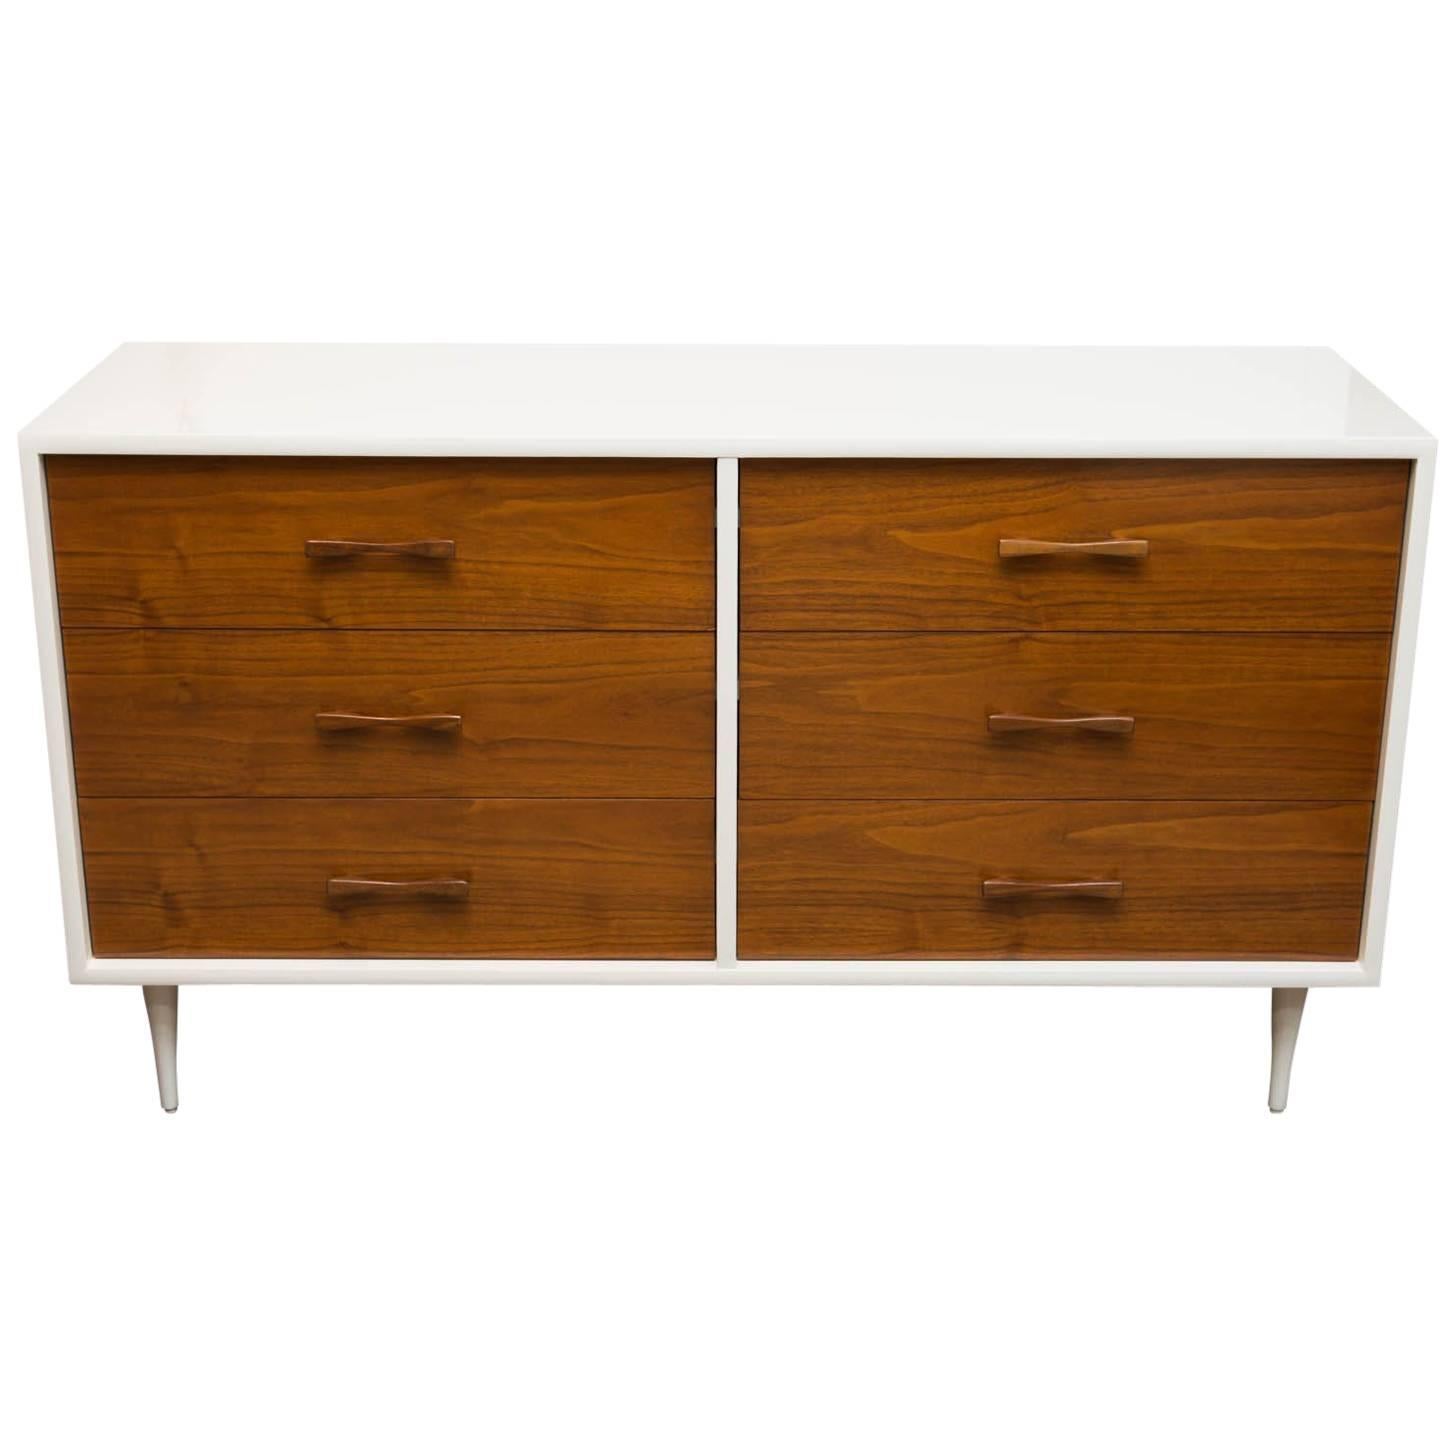 Lacquered Two-Tone Mid-Century Modern Low Dresser